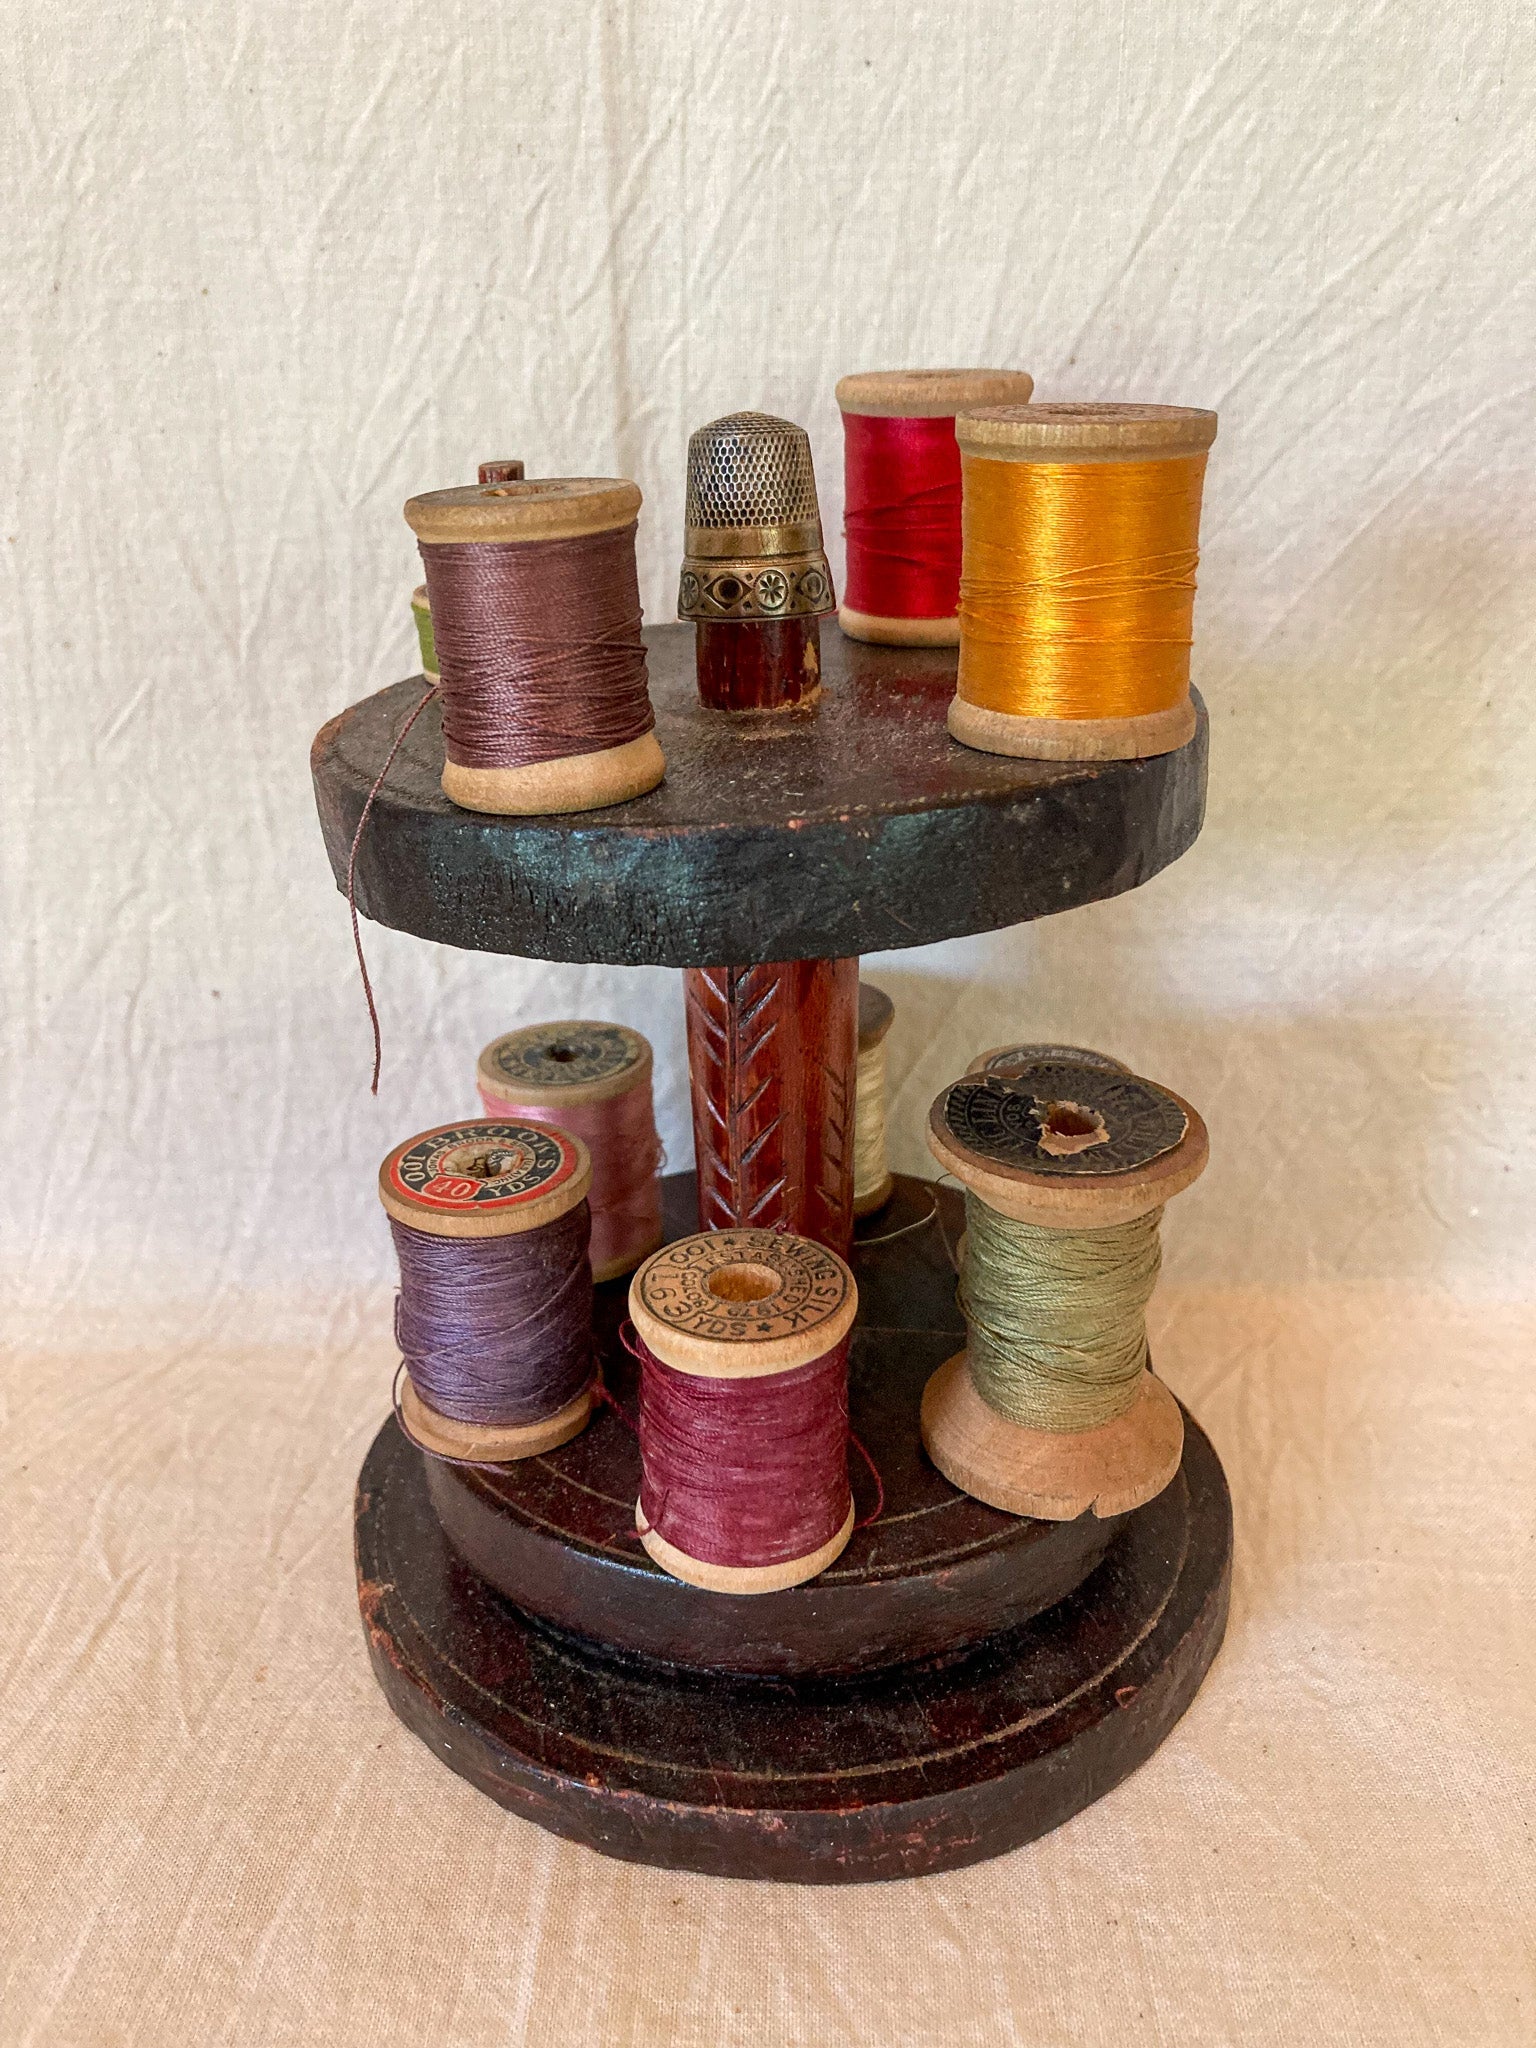 Vintage Folk Art Spool Holder with Sterling Silver Thimble and Spools